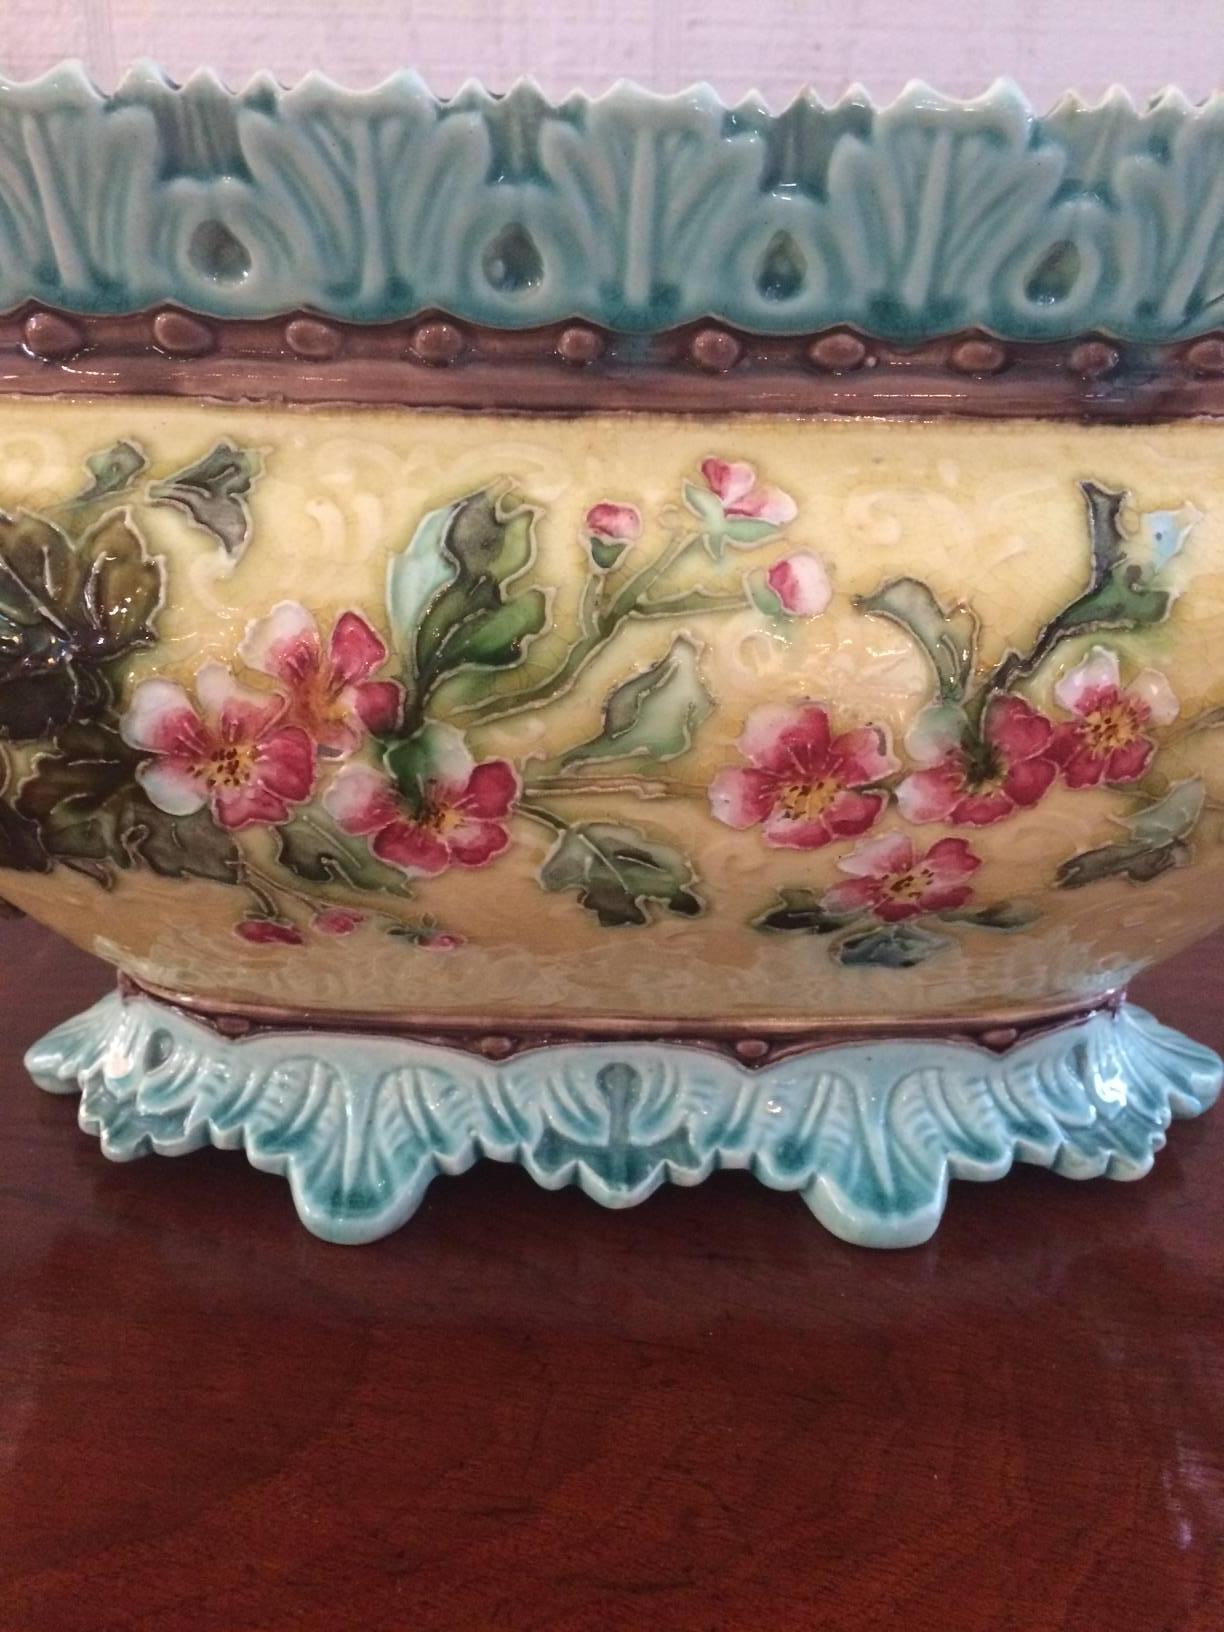 Gorgeous oblong Majolica centerpiece or planter in luscious soft yellow, celadon blue, pink and green flowers on one side and purple and green blossoms on the reverse. L 13 is marked on the bottom.